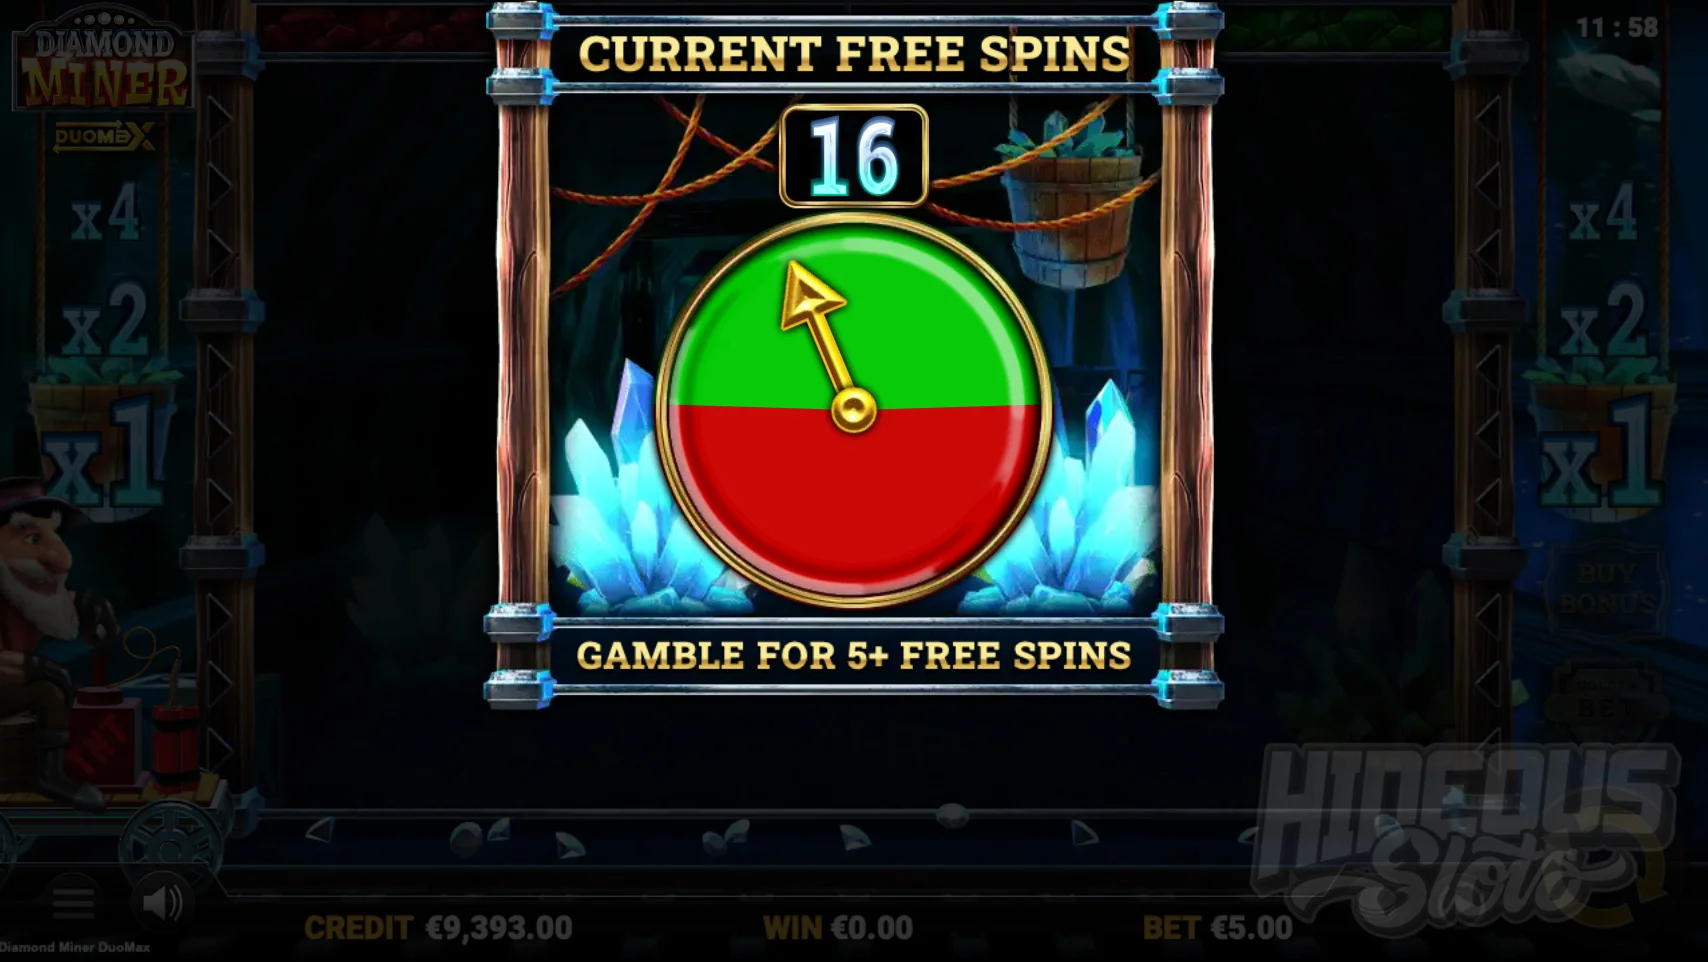 Players Can Use the Free Spins Gamble to Gamble up to 16 Spins